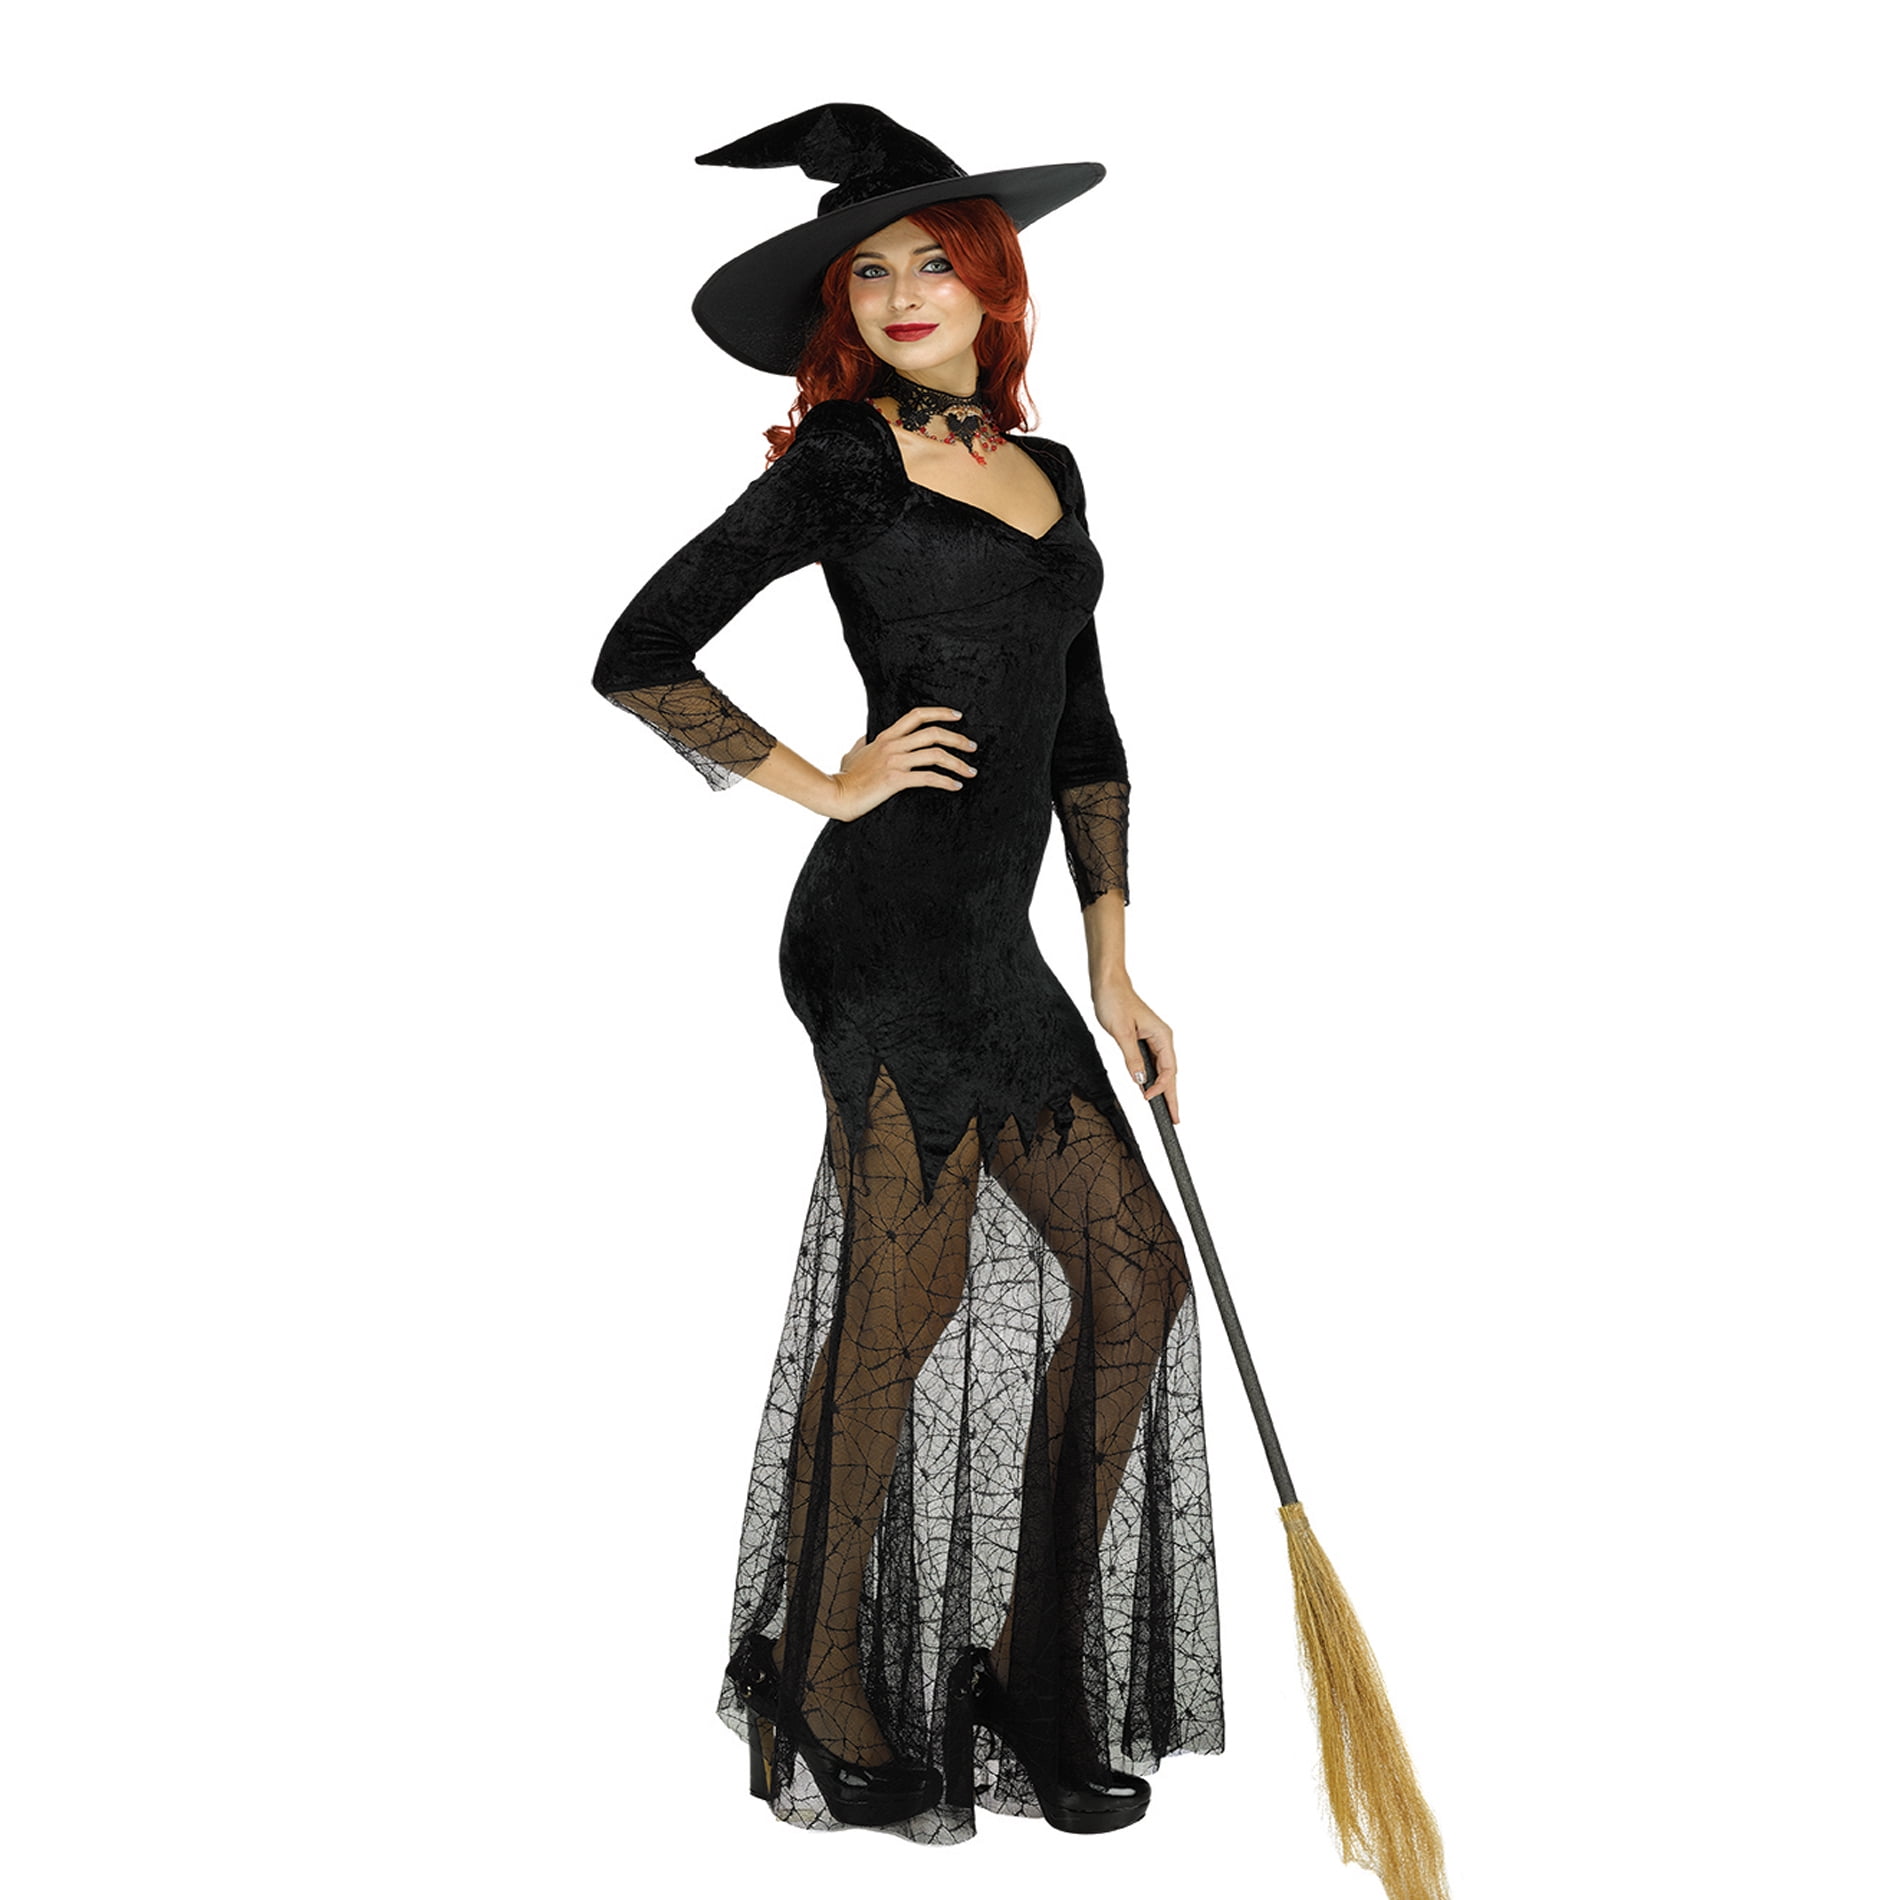 Sorceress Wicked Witch Black Gothic Gown Fancy Dress Up Halloween Child Costume 